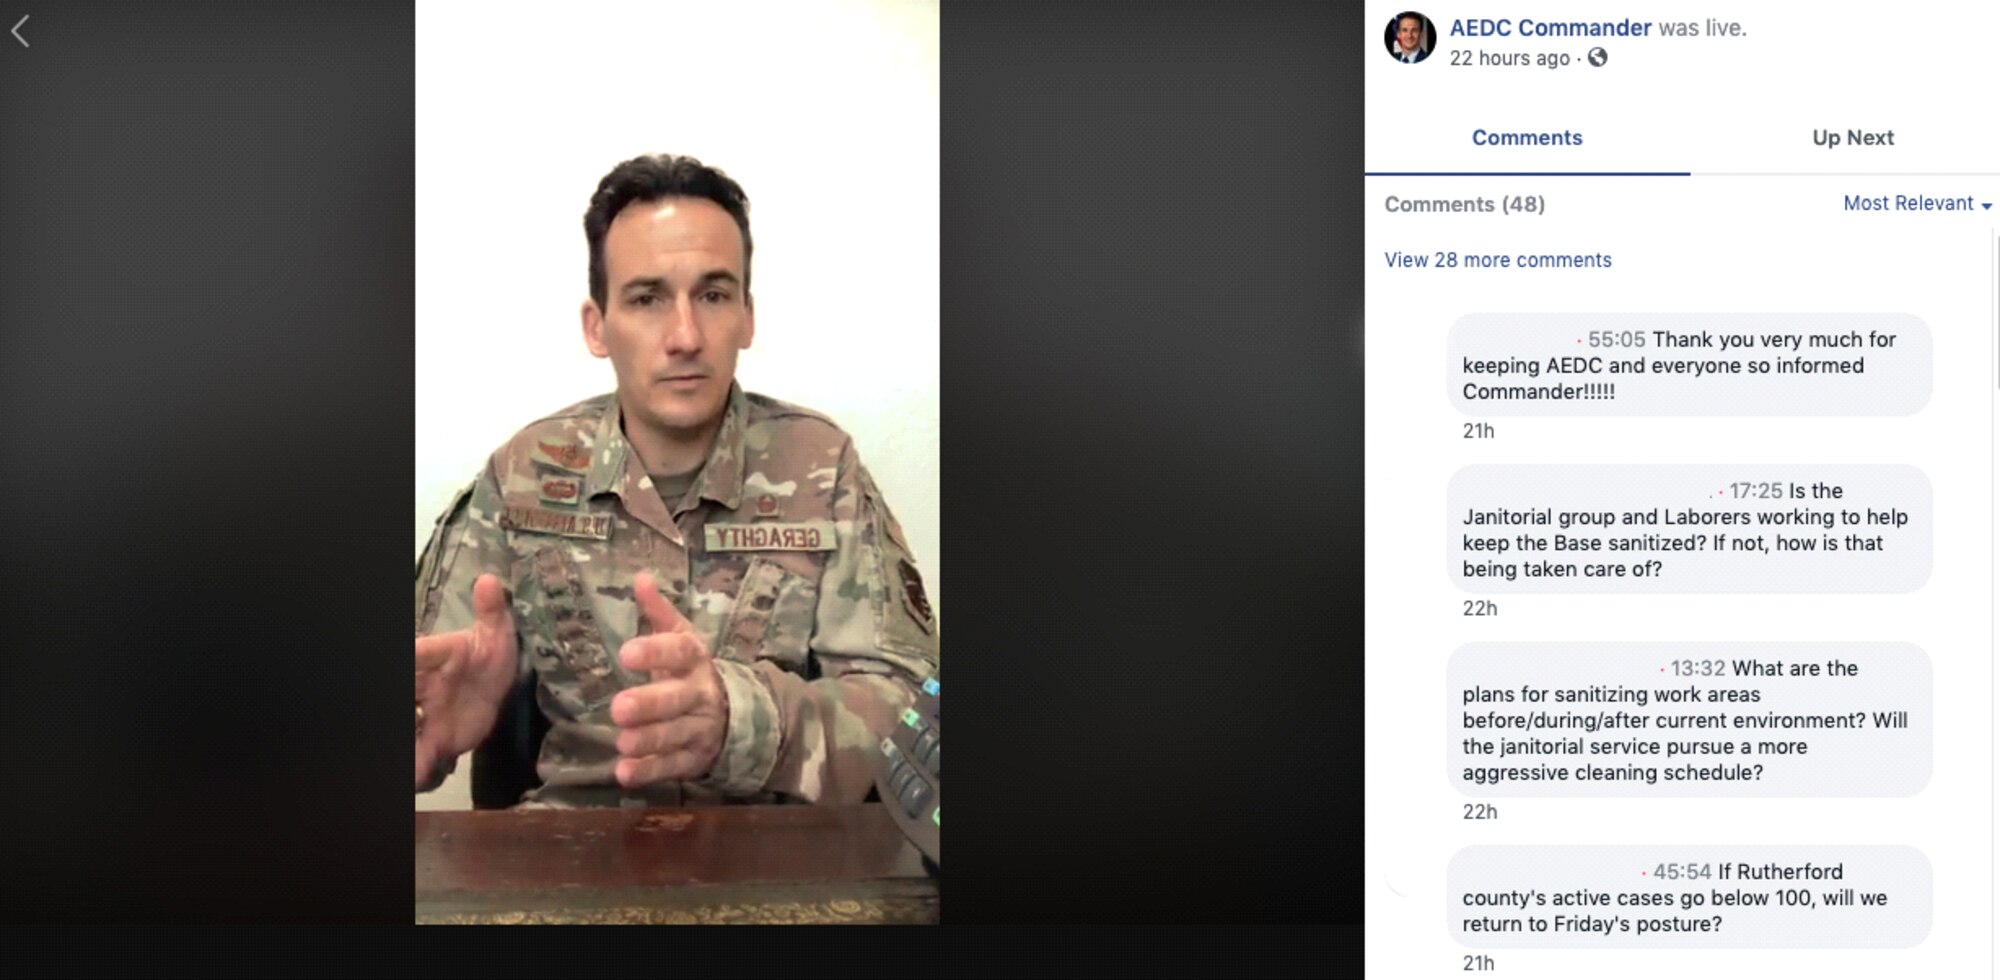 Arnold Engineering Development Commander (AEDC) Col. Jeffrey Geraghty conducts a virtual
town hall via Facebook April 8. Geraghty provided an AEDC COVID-19 update aimed at the
workforce and answered questions from AEDC team members through Facebook that were
presented by AEDC Public Affairs Chief Jason Austin. (Screen capture) (This image has been
altered by obscuring images and names within it for privacy reasons.)